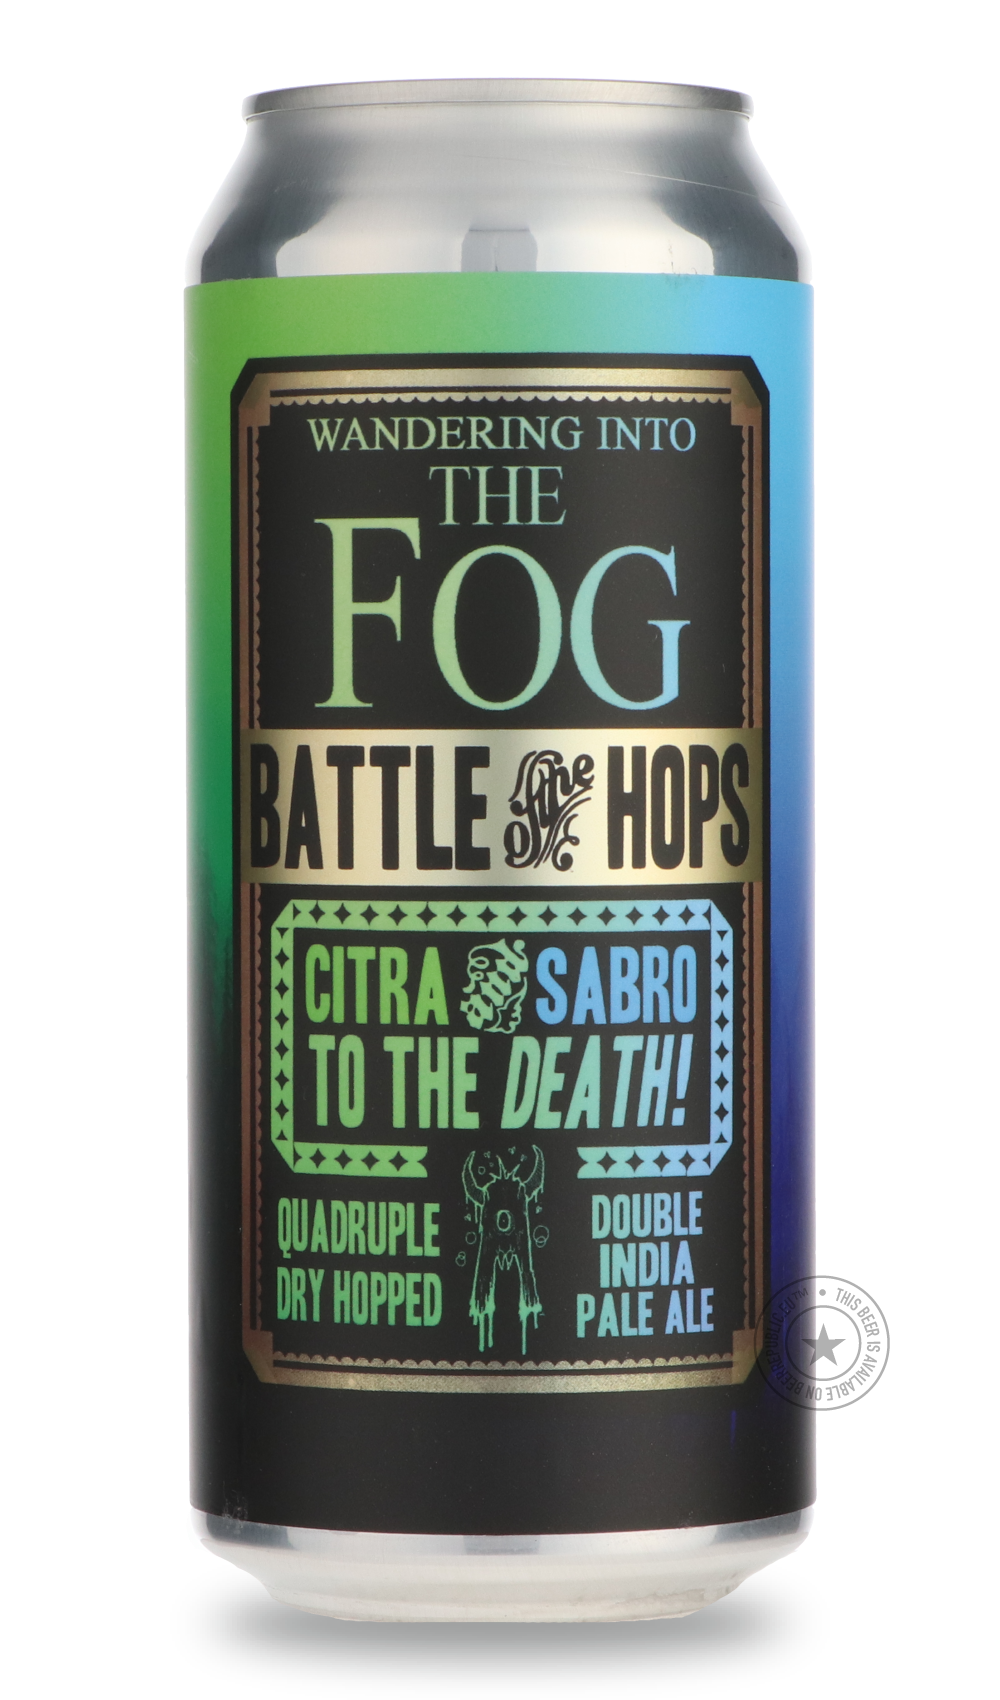 -Abomination- Wandering Into the Fog Battle of the Hops: Citra & Sabro-IPA- Only @ Beer Republic - The best online beer store for American & Canadian craft beer - Buy beer online from the USA and Canada - Bier online kopen - Amerikaans bier kopen - Craft beer store - Craft beer kopen - Amerikanisch bier kaufen - Bier online kaufen - Acheter biere online - IPA - Stout - Porter - New England IPA - Hazy IPA - Imperial Stout - Barrel Aged - Barrel Aged Imperial Stout - Brown - Dark beer - Blond - Blonde - Pilsn